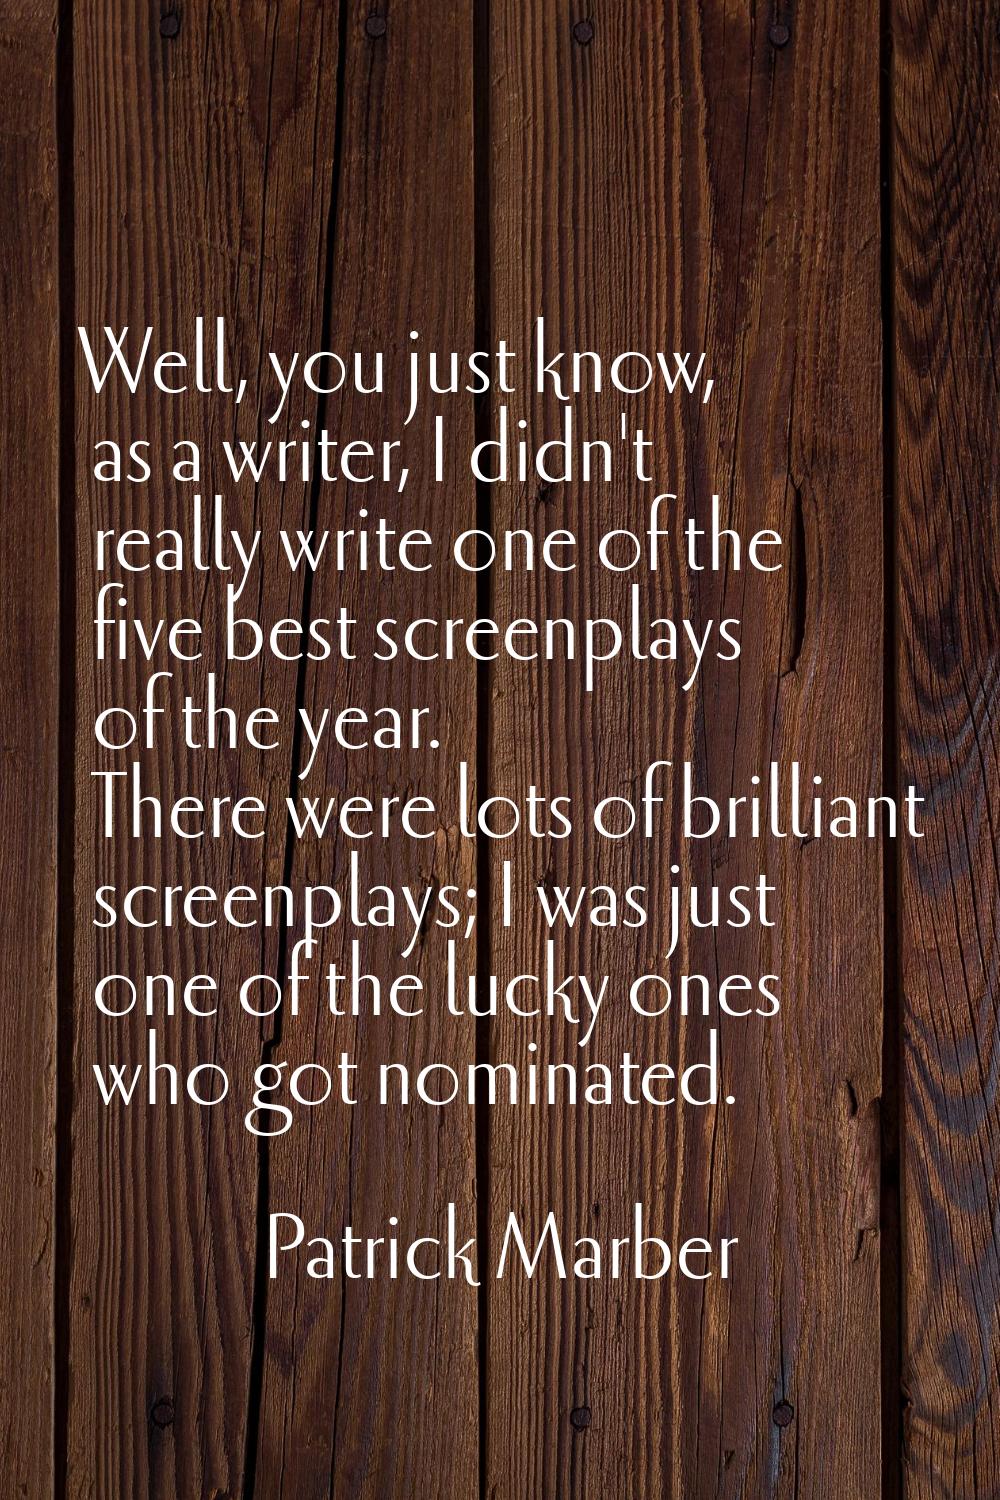 Well, you just know, as a writer, I didn't really write one of the five best screenplays of the yea